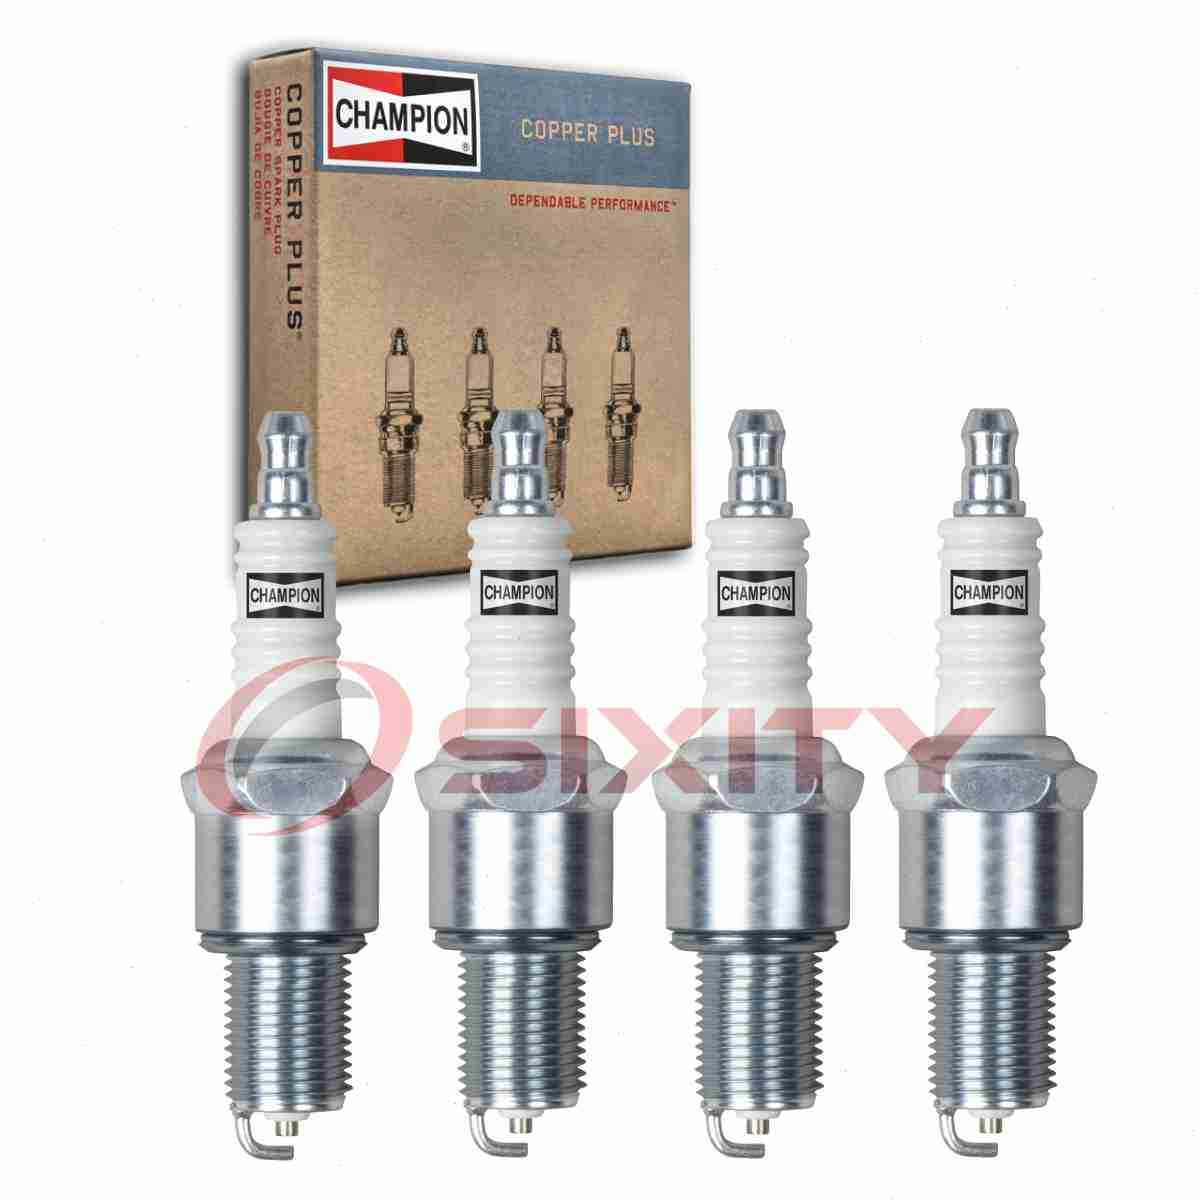 4 pc Champion Exhaust Side Copper Plus Spark Plugs for 1982-1983 Nissan kq